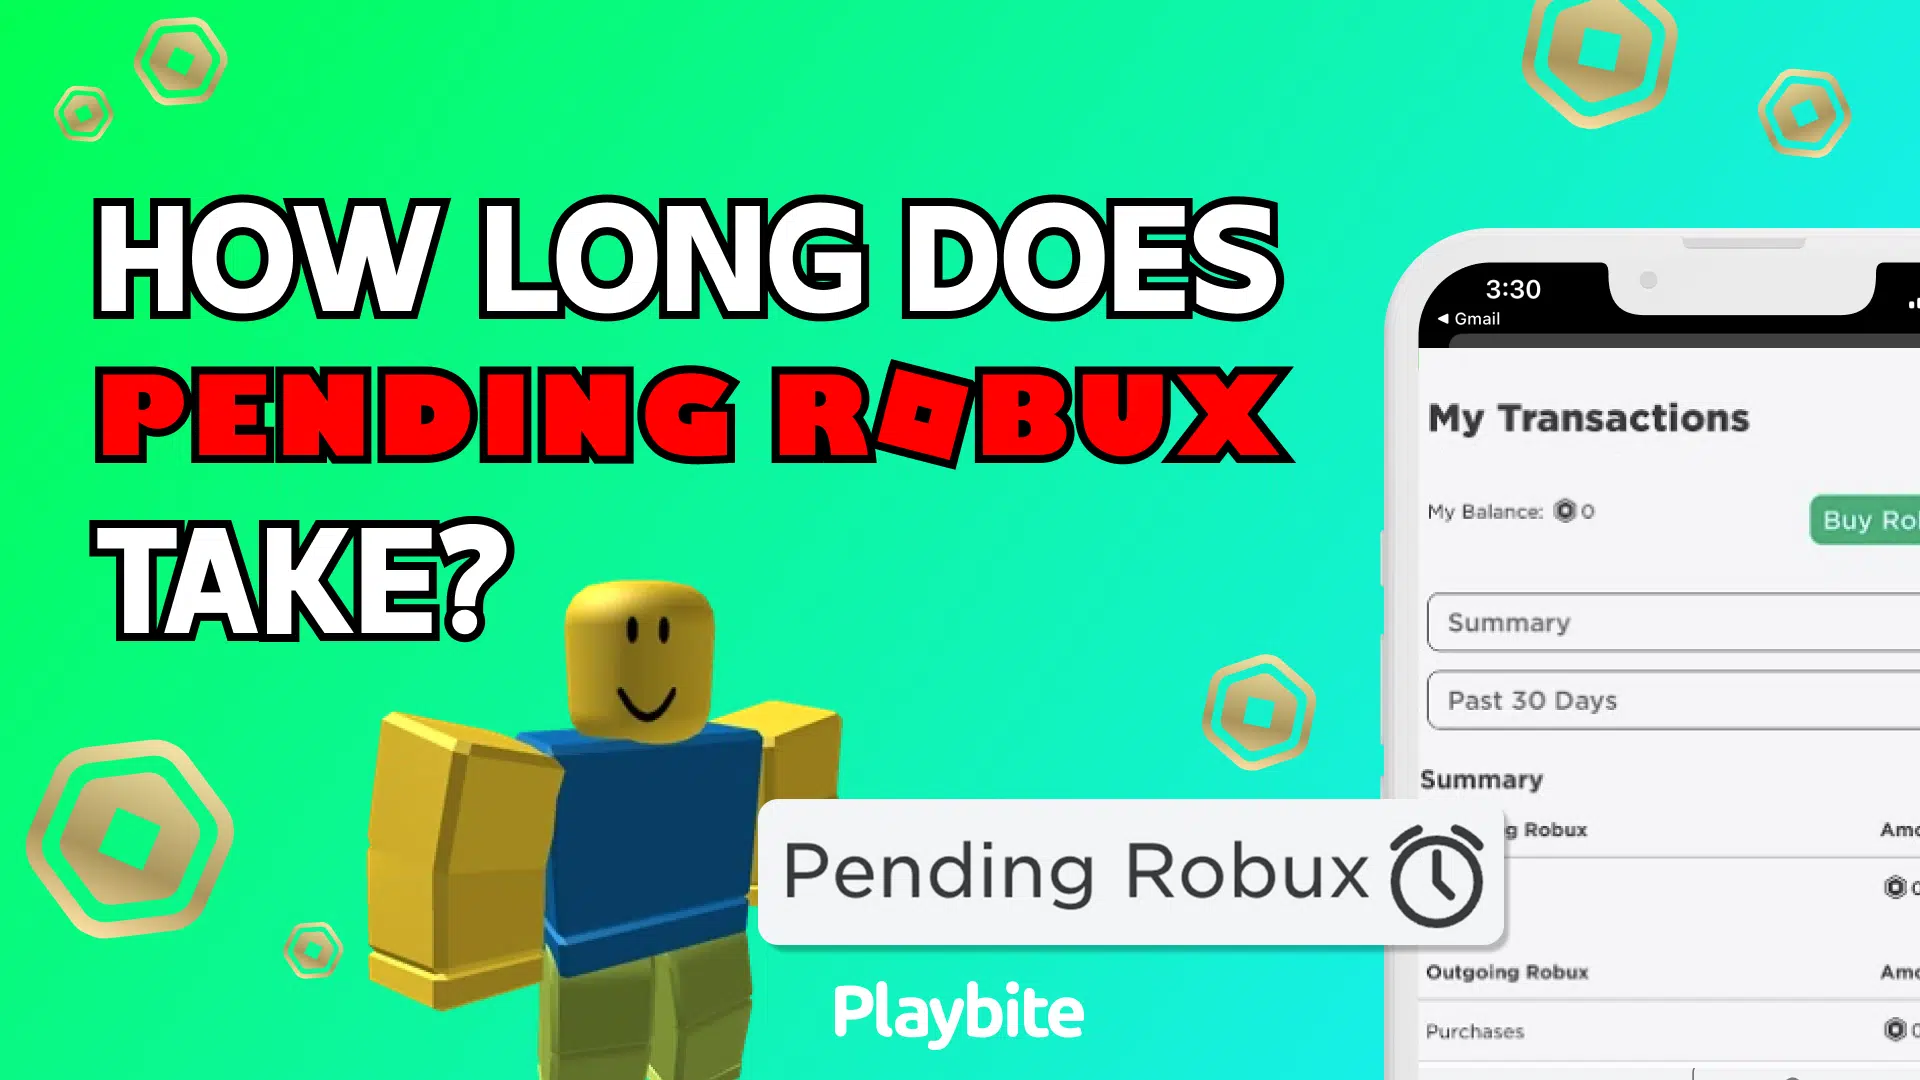 why i cant see my pending robux? did i get scammed? : r/crosstradingrblx